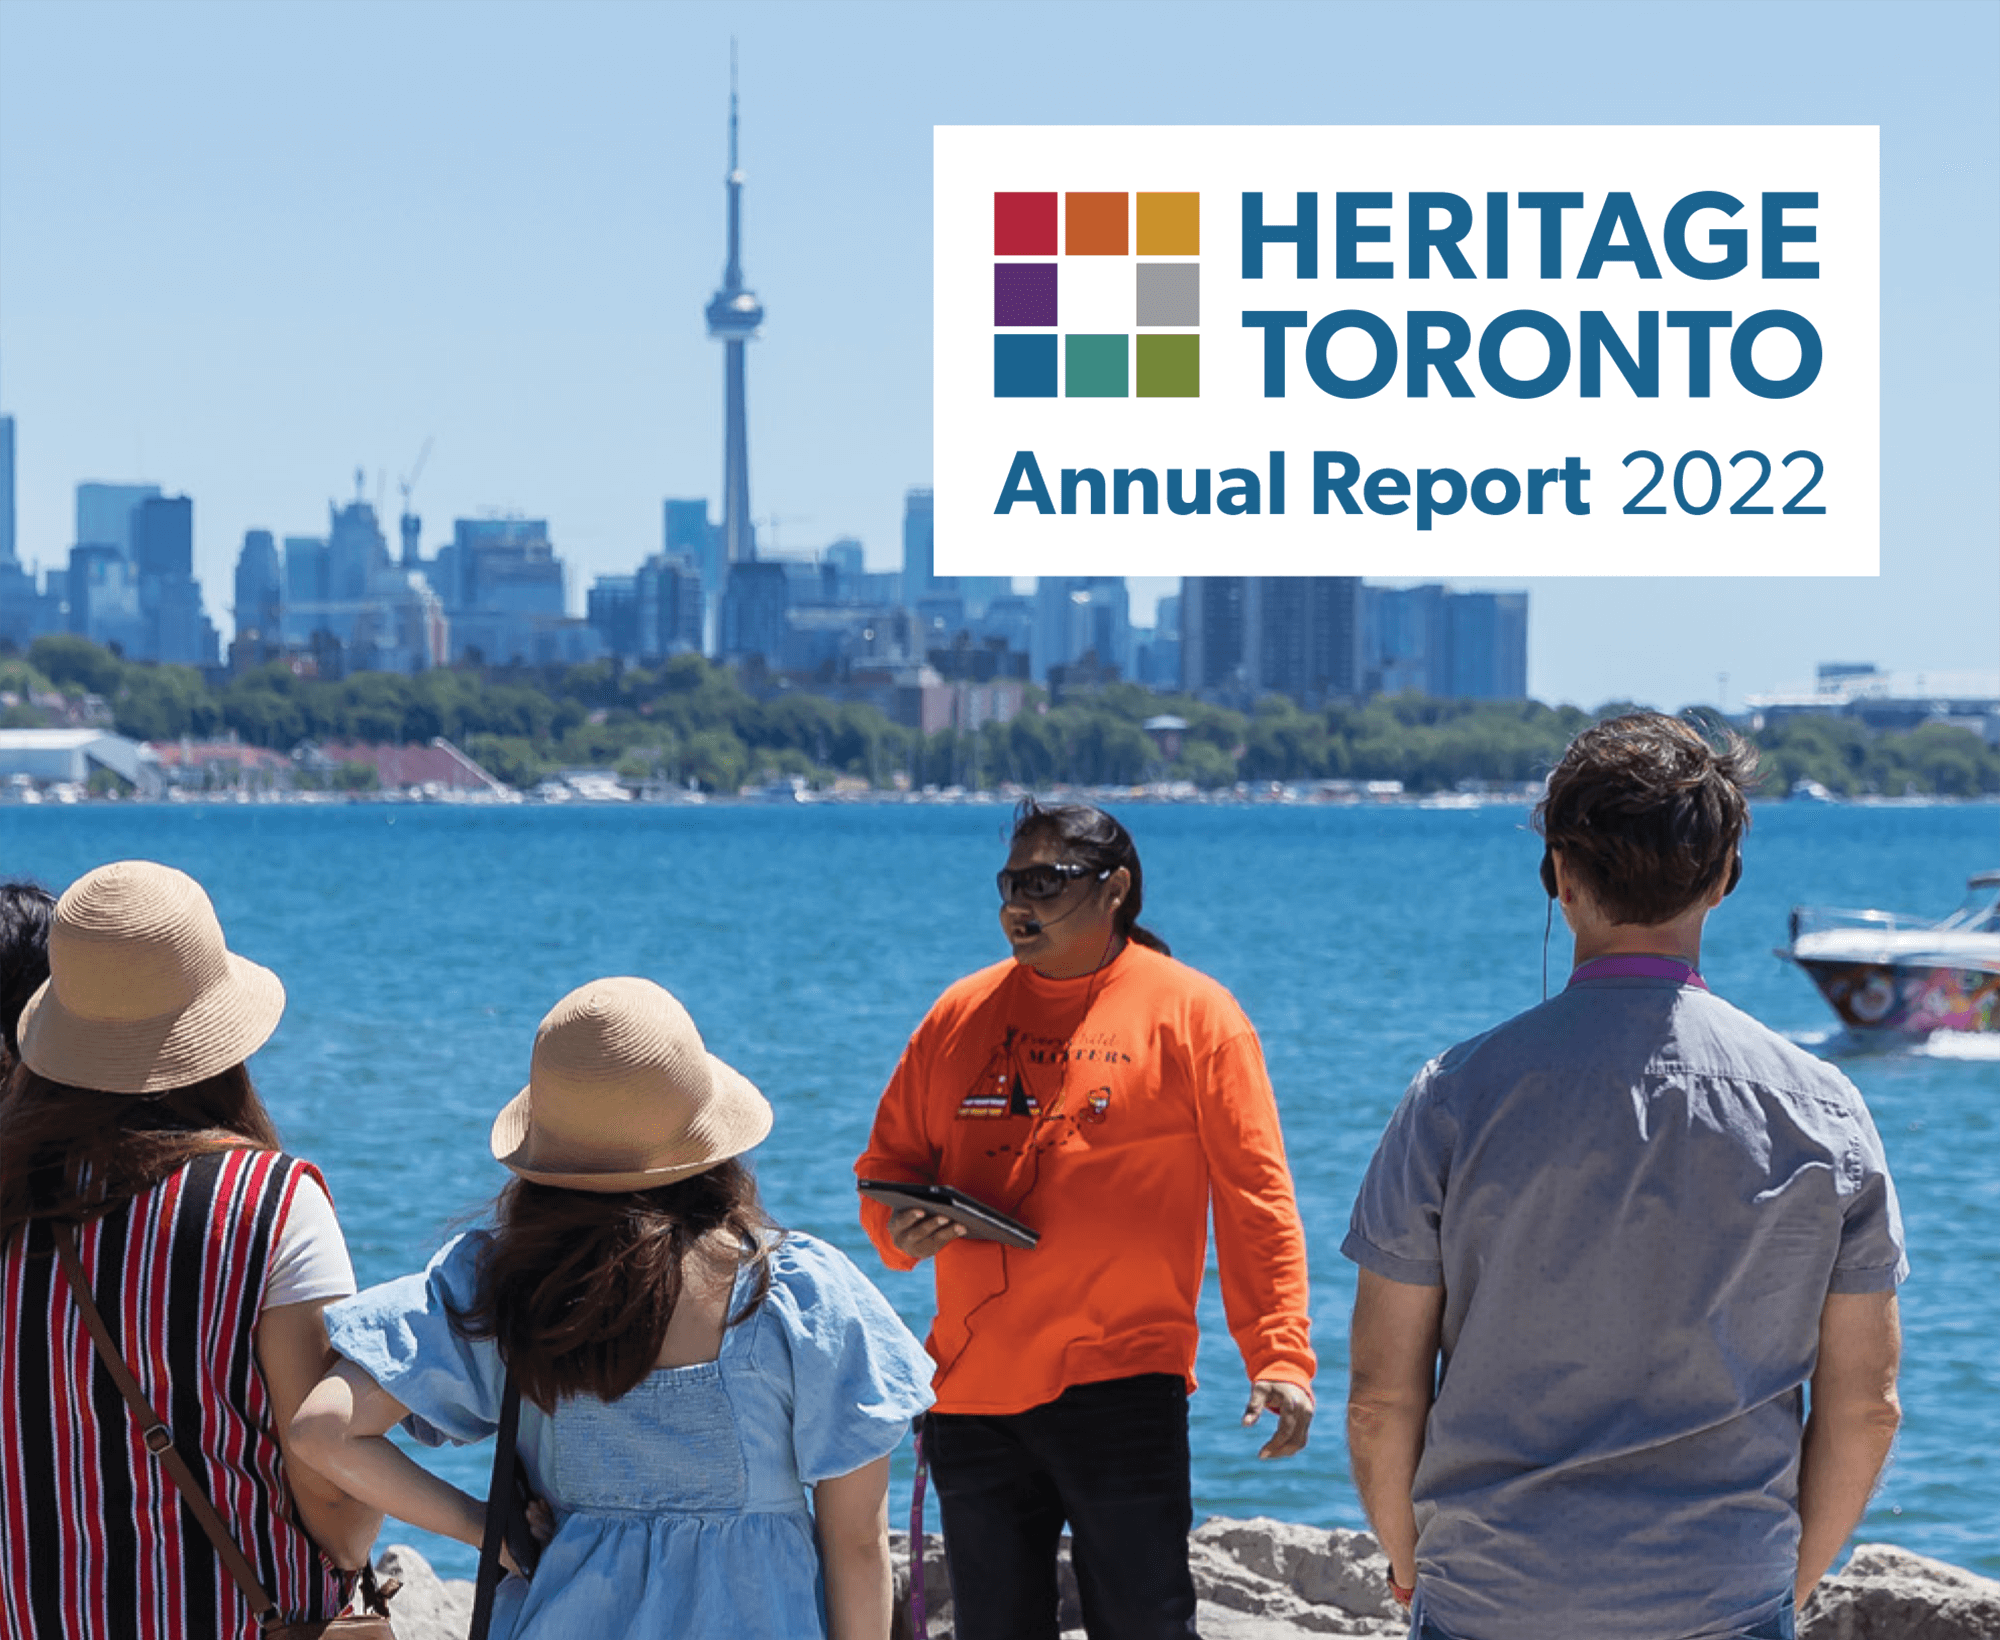 Graphic showing image of people in foreground and cityscape behind large lake with title Heritage Toronto Annual Report 2022